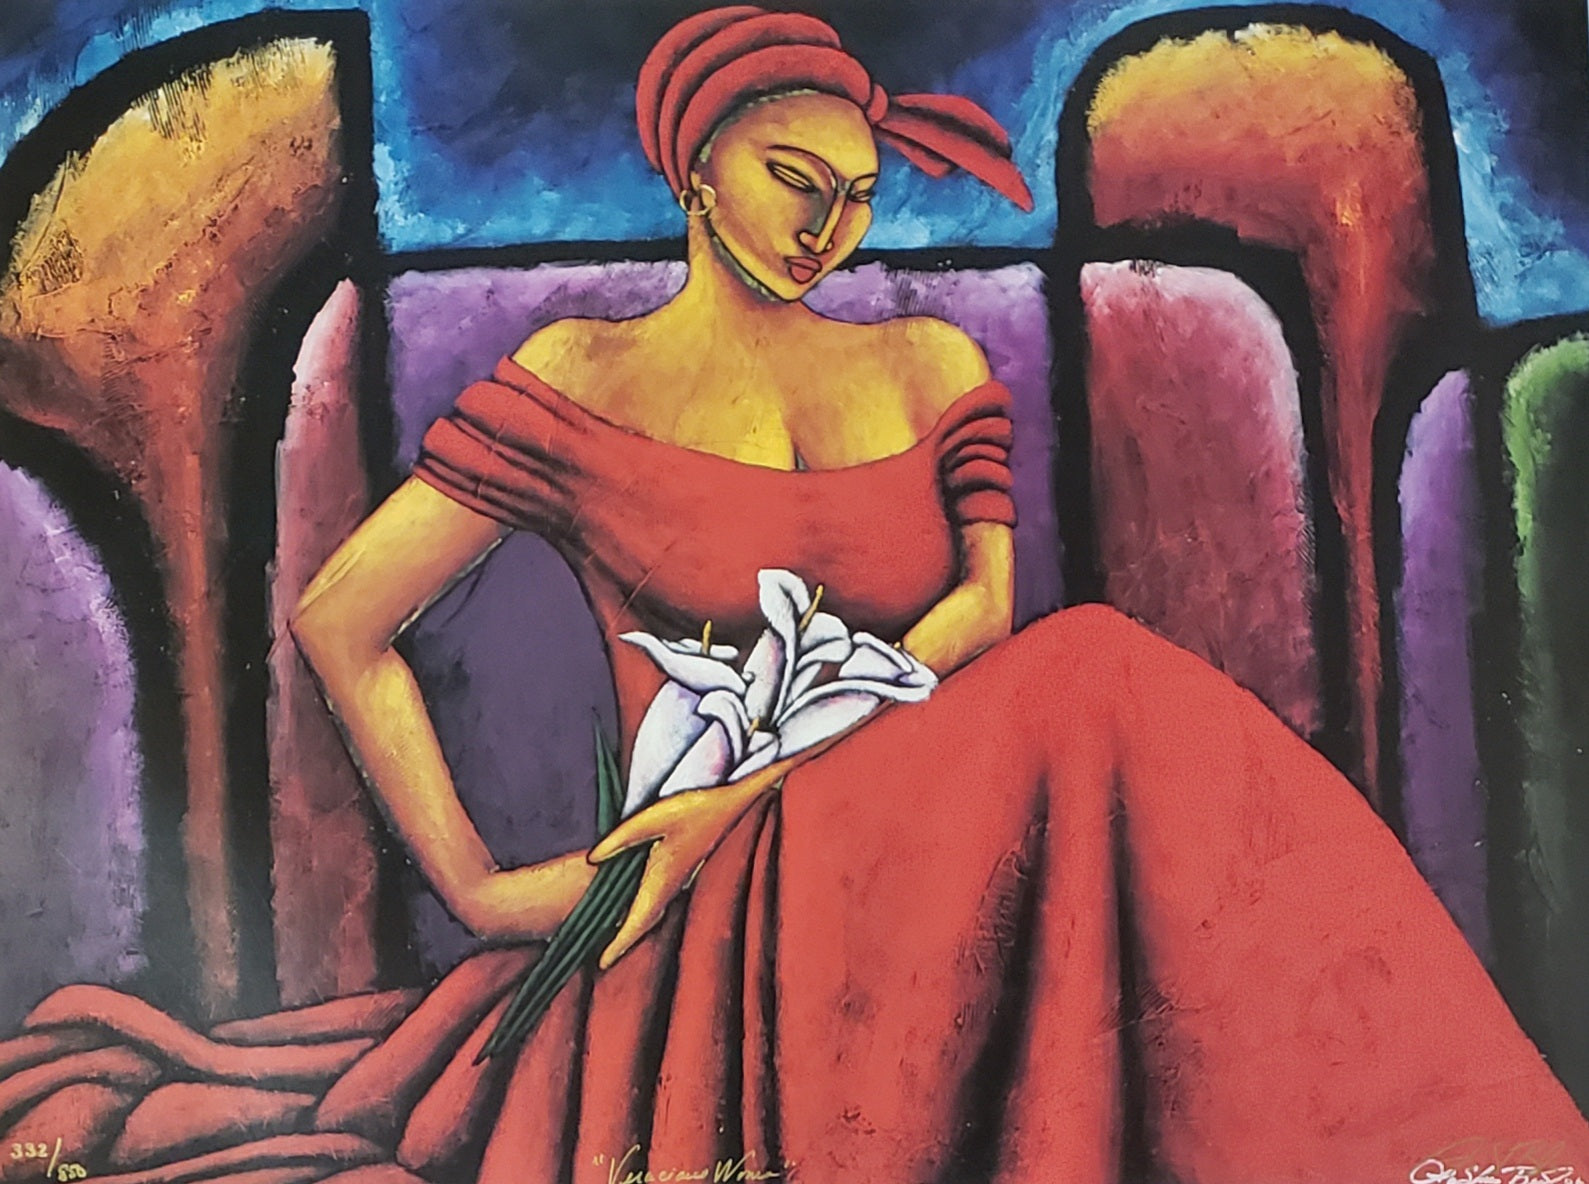 Veracious Woman Limited Edition Lithograph